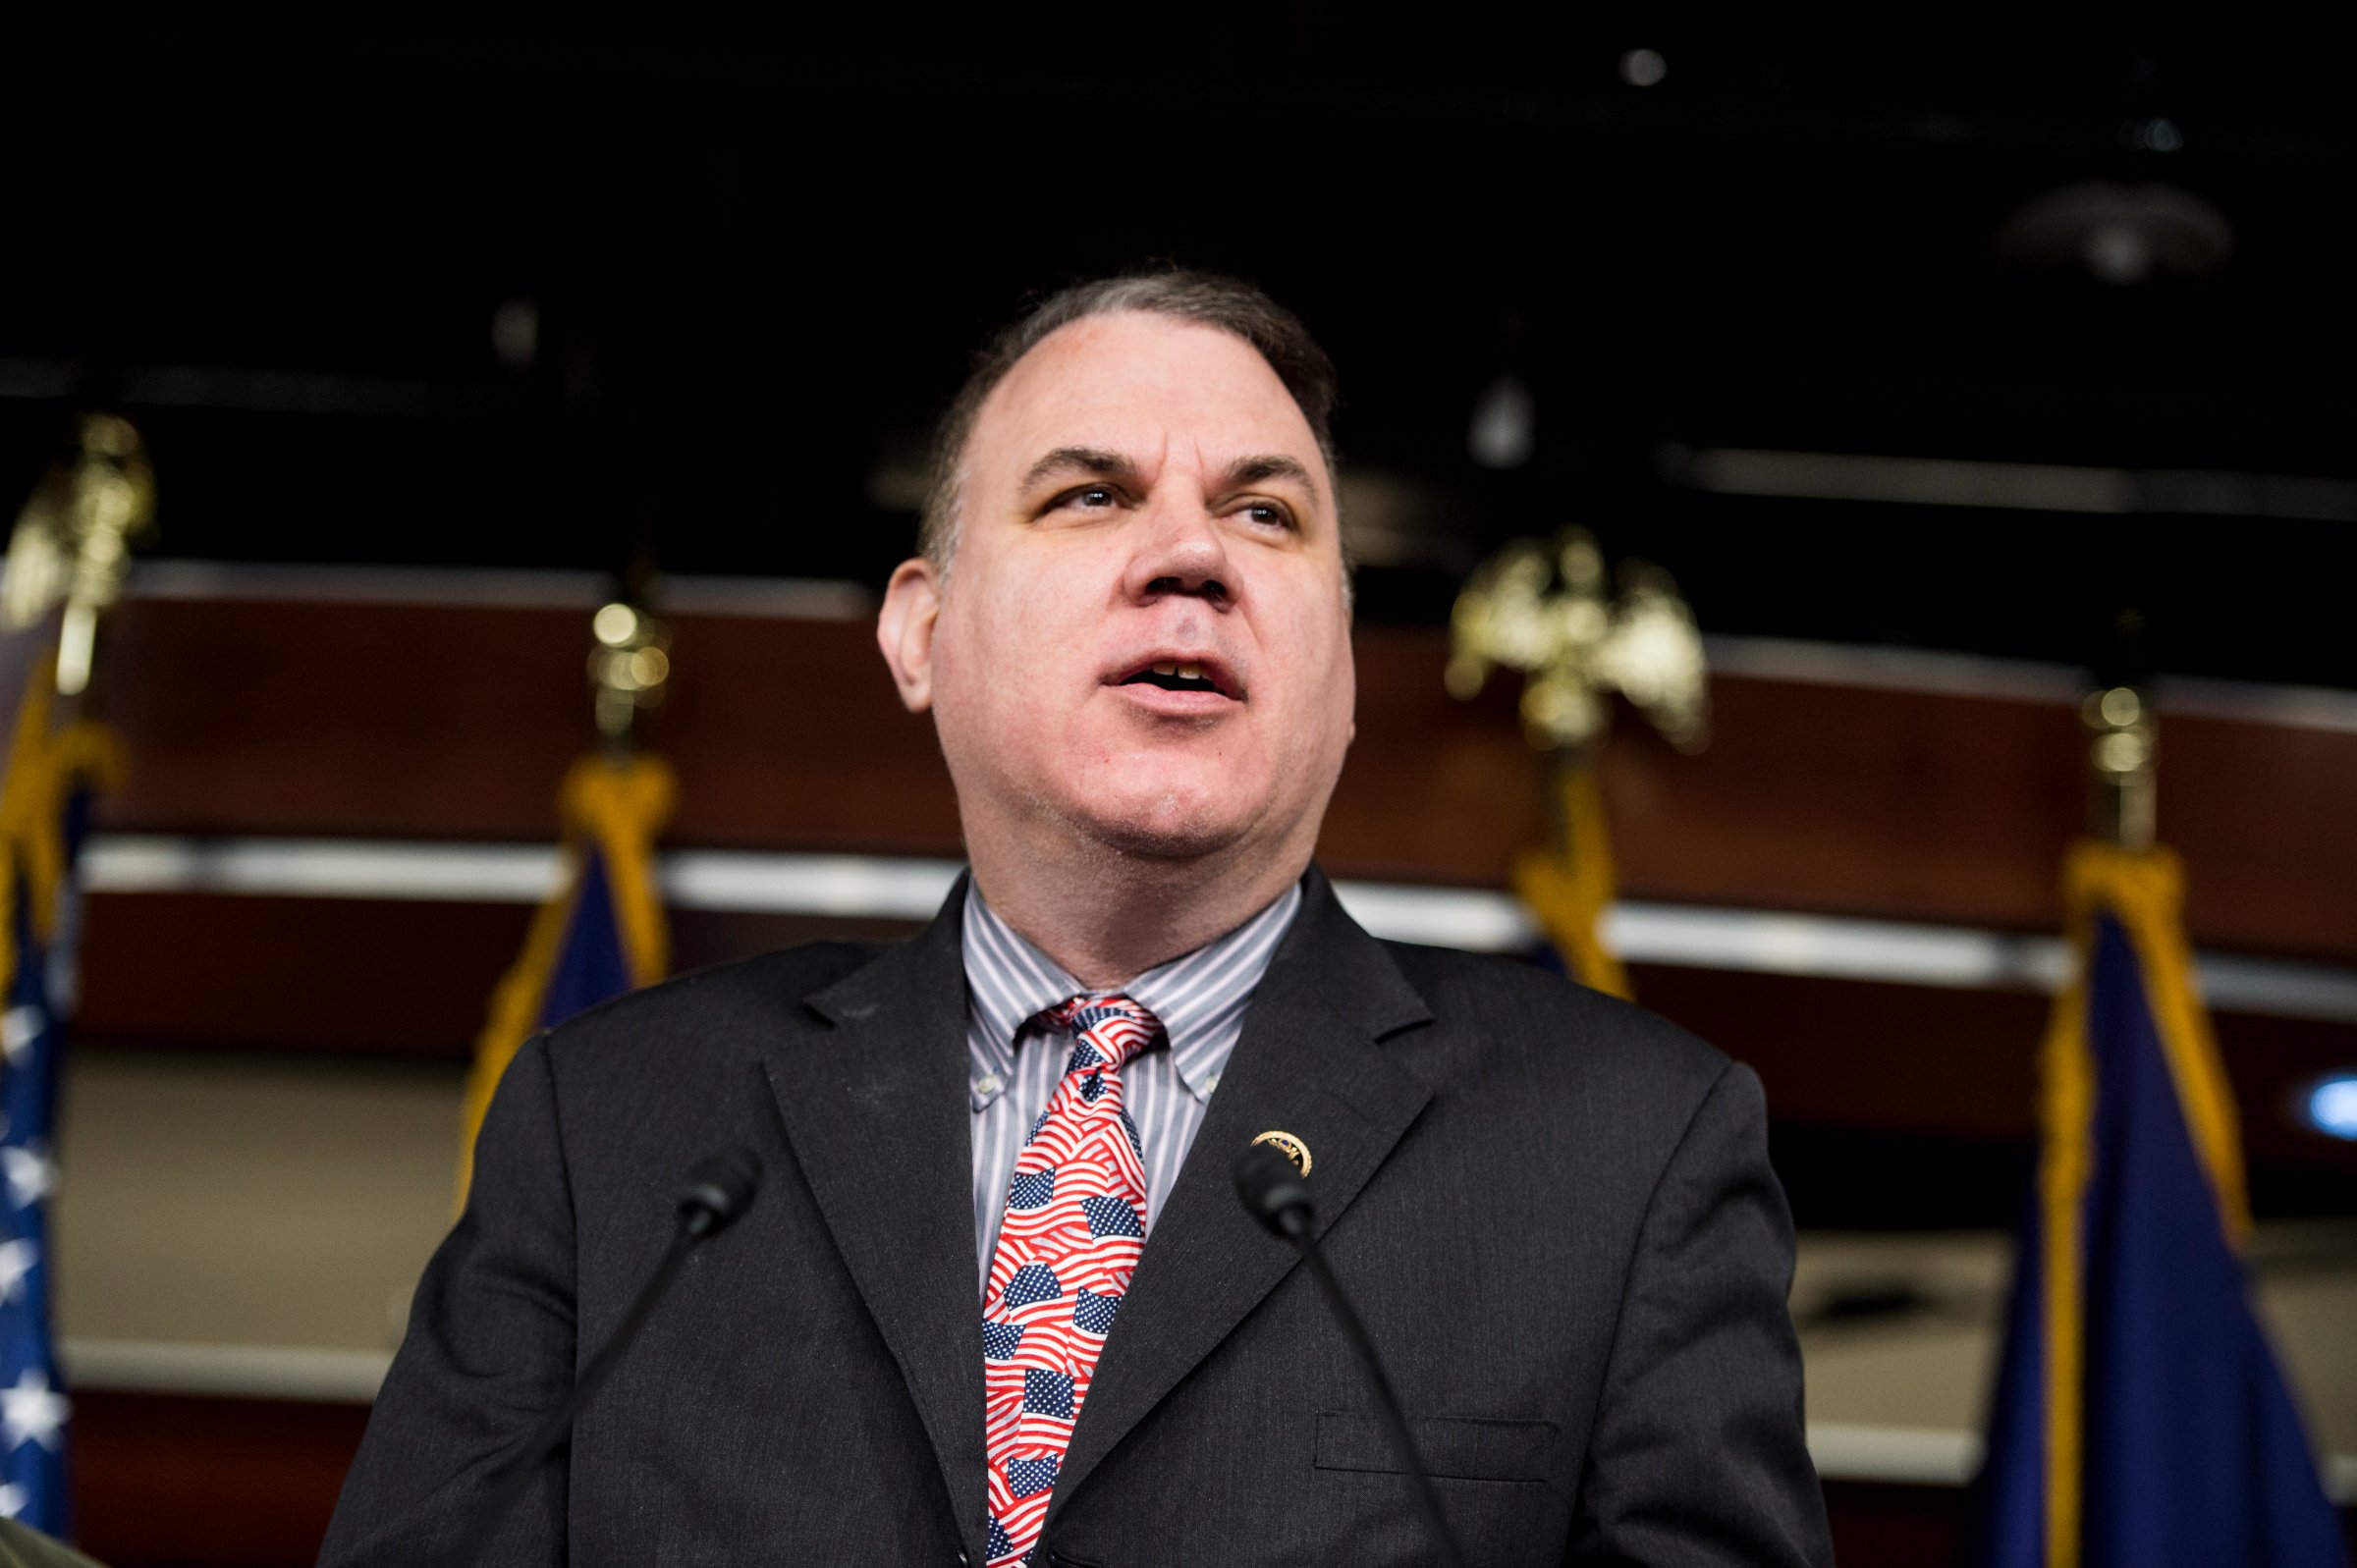 Rep. Alan Grayson, speaks during a House Democrats' news conference in the Capitol on Tuesday, Jan. 13, 2015.